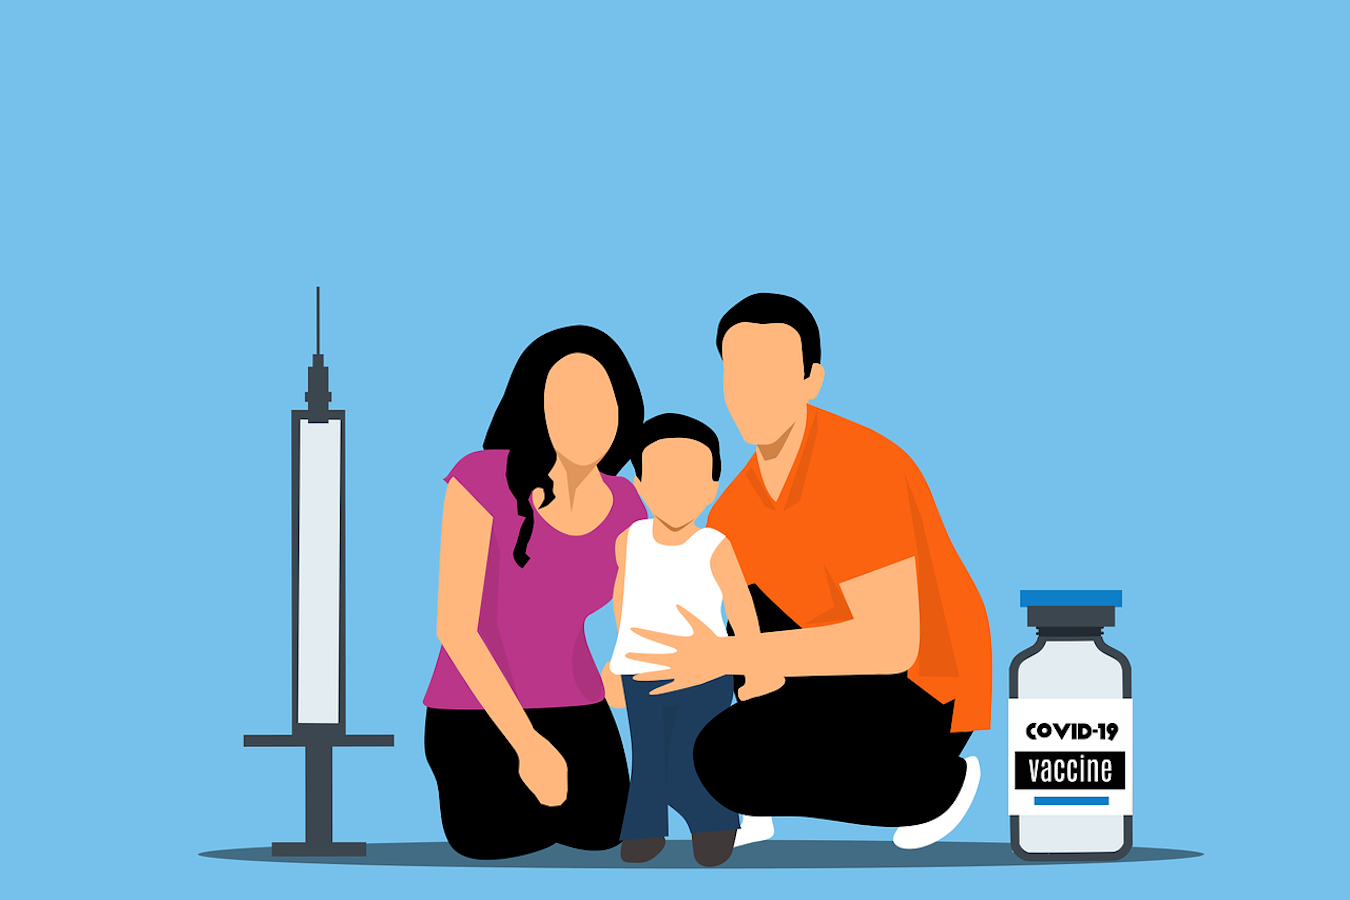 Artist’s graphic of child, parents, COVID-19 vaccine bottle and syringe